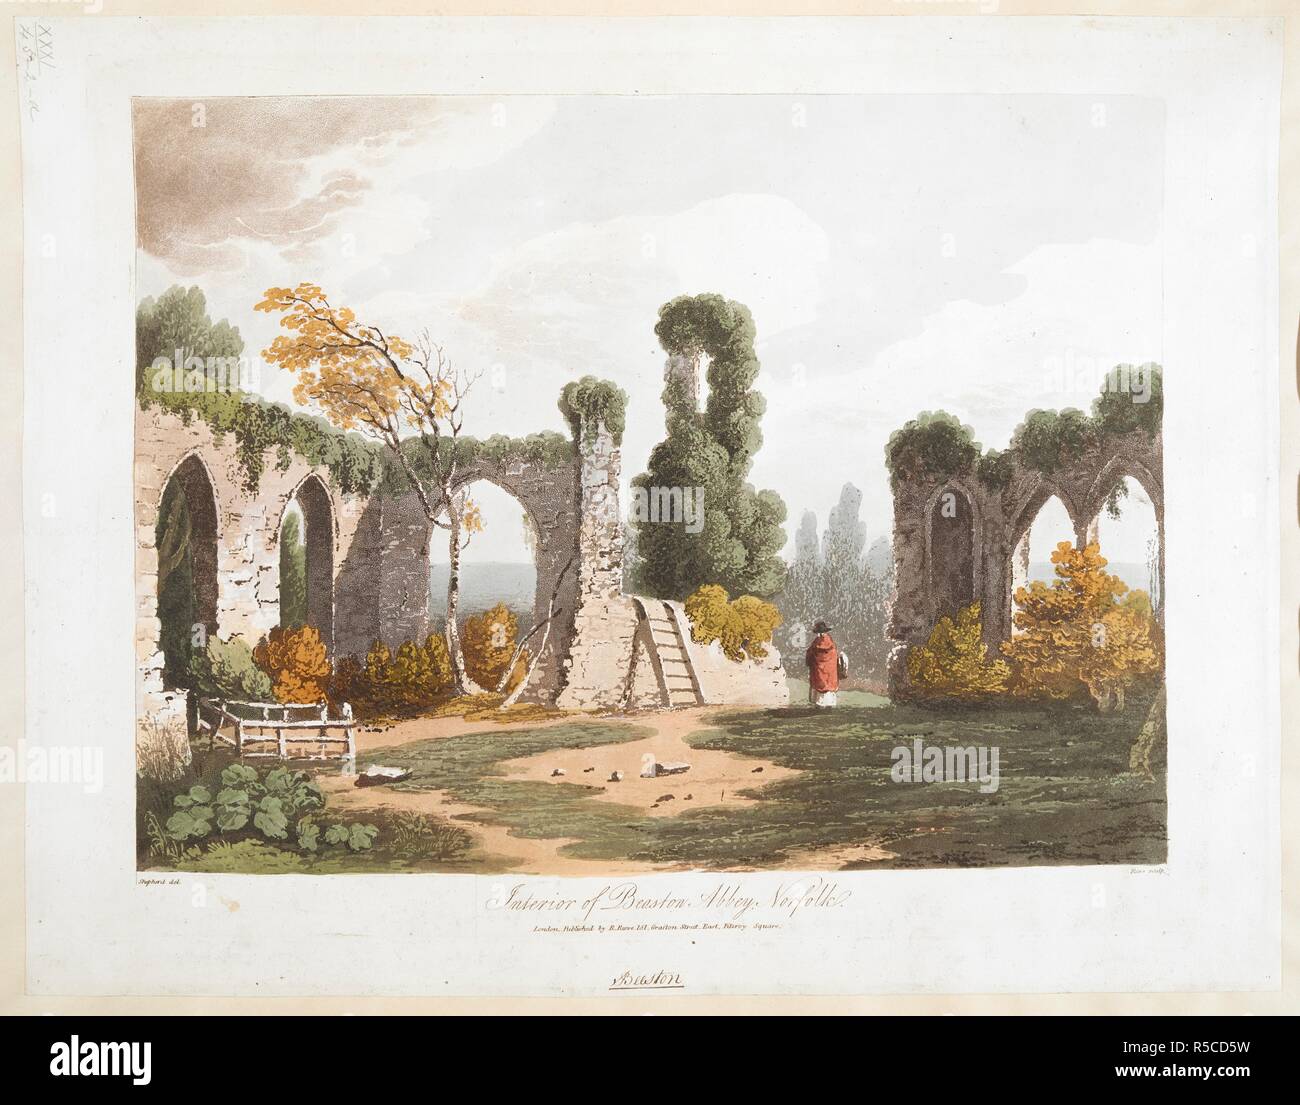 A ruined abbey; ivy and foliage growing on pointed arches; a figure in a red cape in the middle ground; trees in the distance. Interior of Beaston Abbey, Norfolk. London : Published by R. Reeve 151 Grafton Street, East, Fitzroy Square., [around 1790-1810]. Source: Maps K.Top.31.45.2.a. Language: English. Author: Shepherd, Thomas. Stock Photo